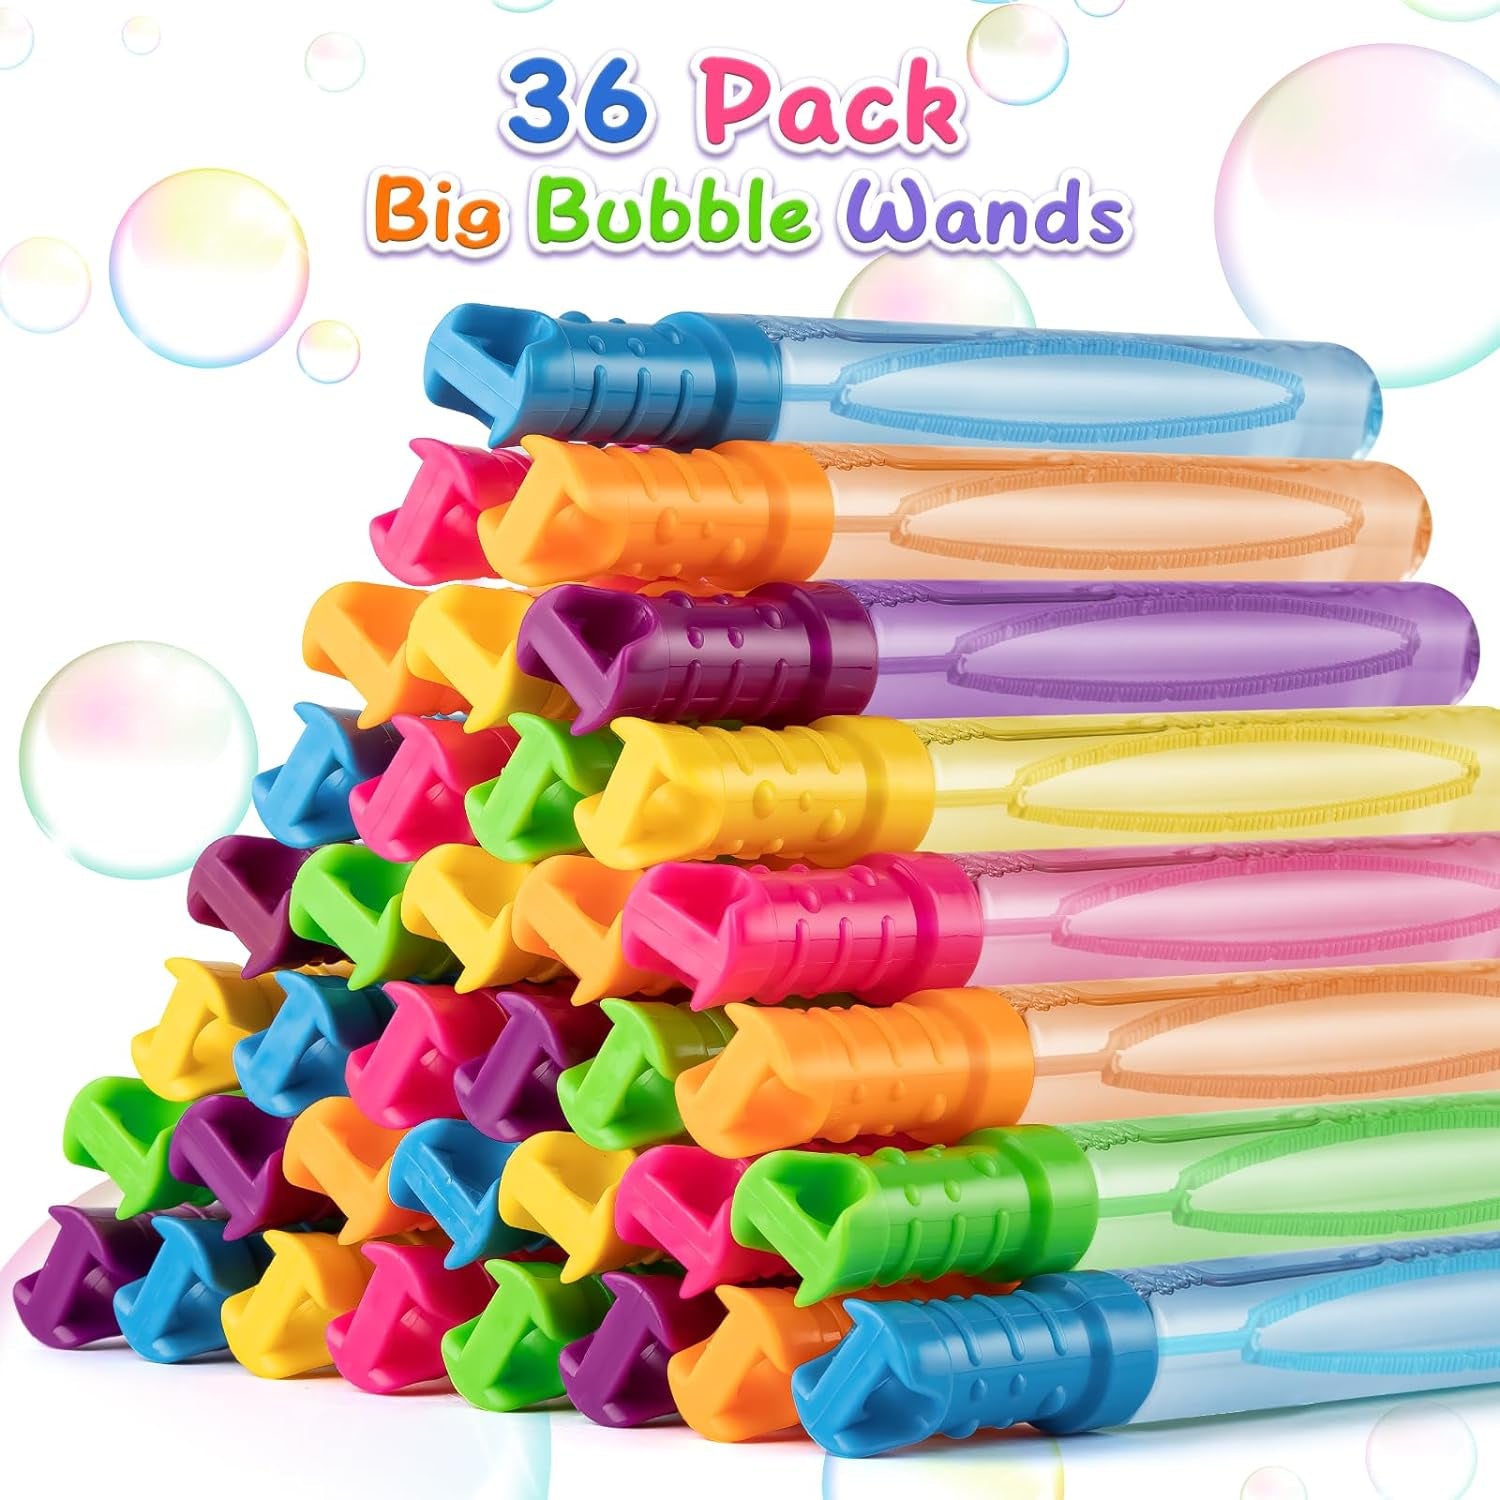 36 Pack Big Bubble Wands Bulk in 6 Colors, Bulk Party Favors for Kids, Ideal Goodies Bags Stuffers, Summer, Easter, Halloween, Valentine, School Classroom Prizes for Boys & Girls